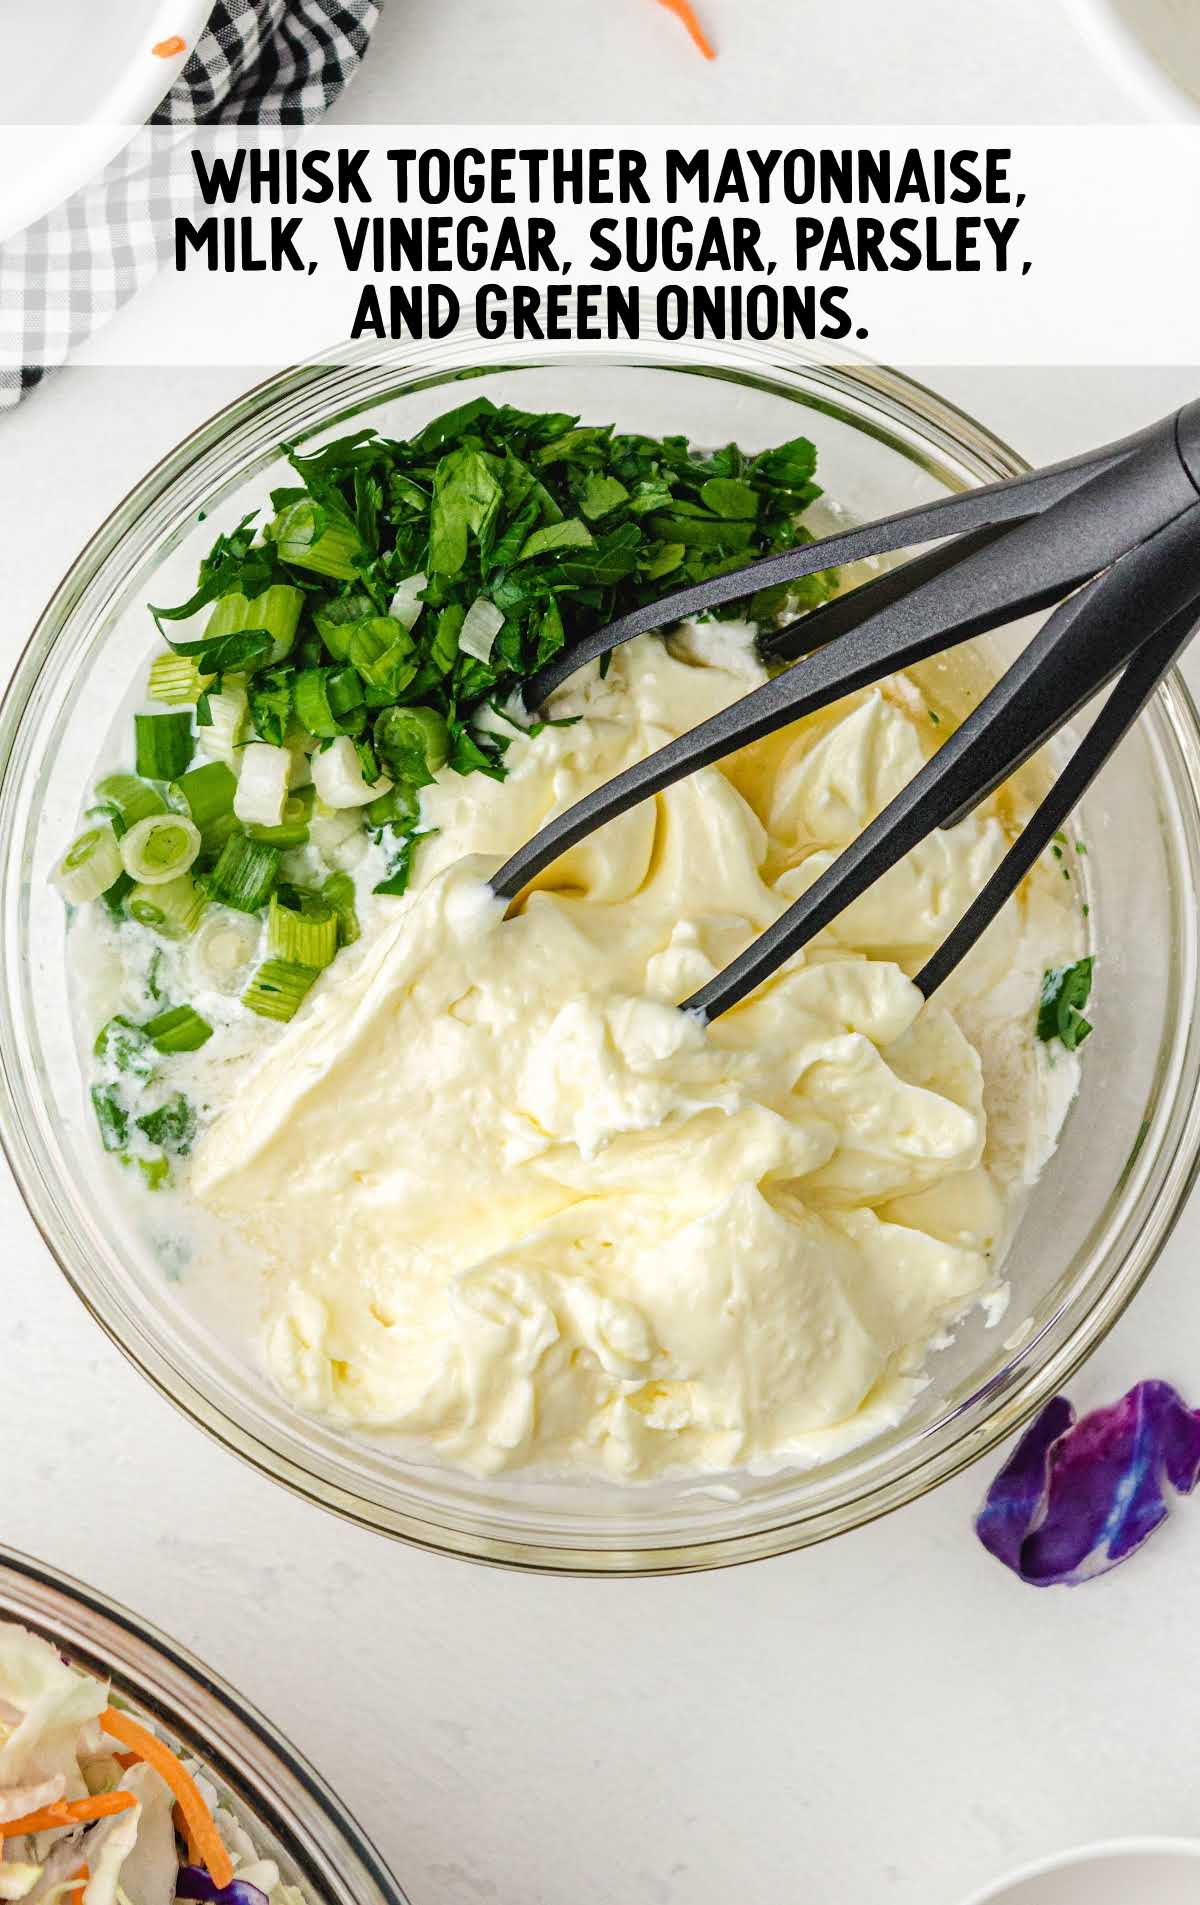 mayonnaise, milk, vinegar, sugar, parsley, and green onions whisked together in a bowl